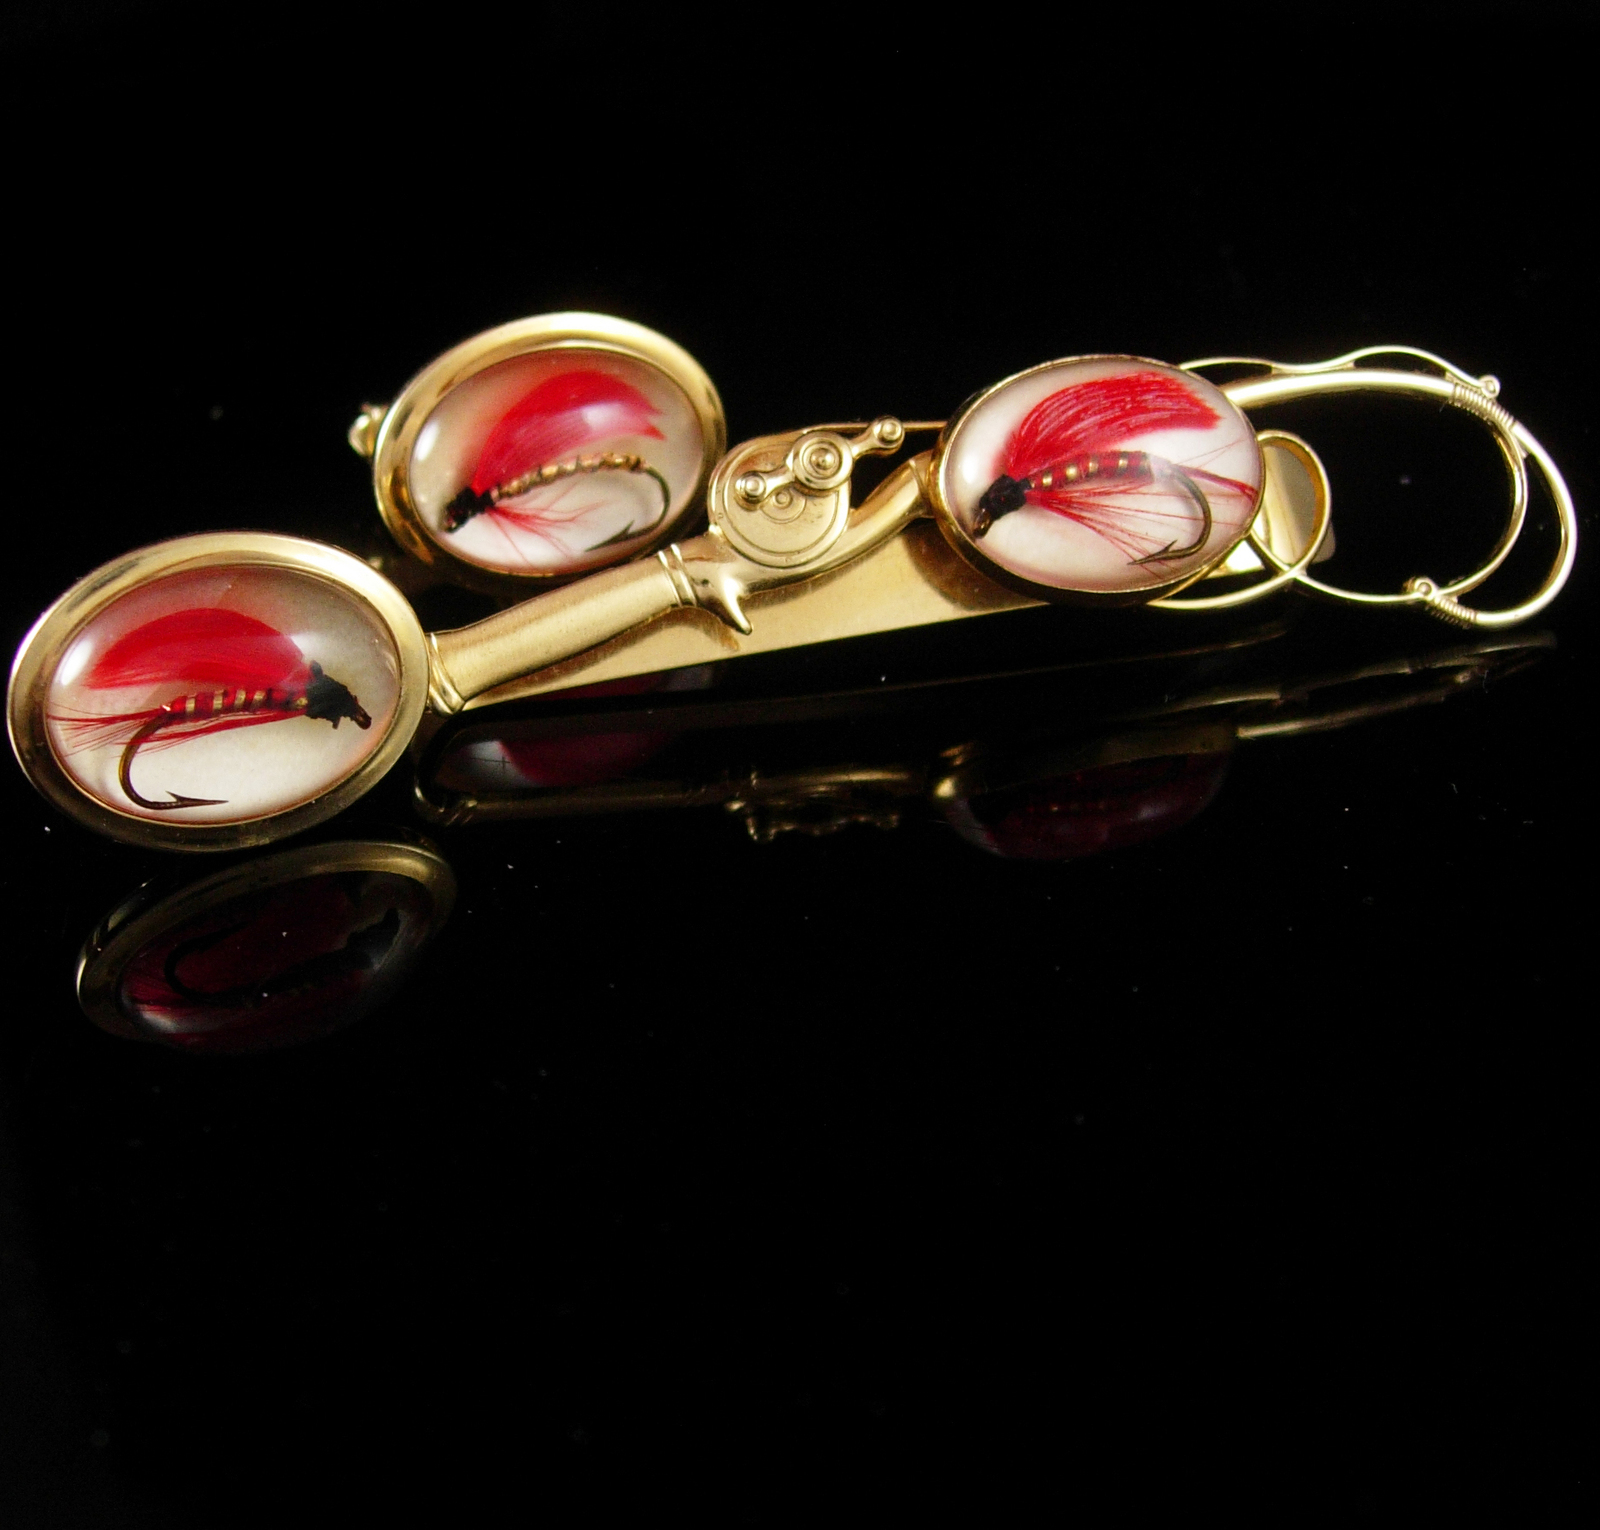 Fly Fish Lure Cufflinks Fishing Rod Retirement gift Vintage Bubble Glass Gold fi - $245.00